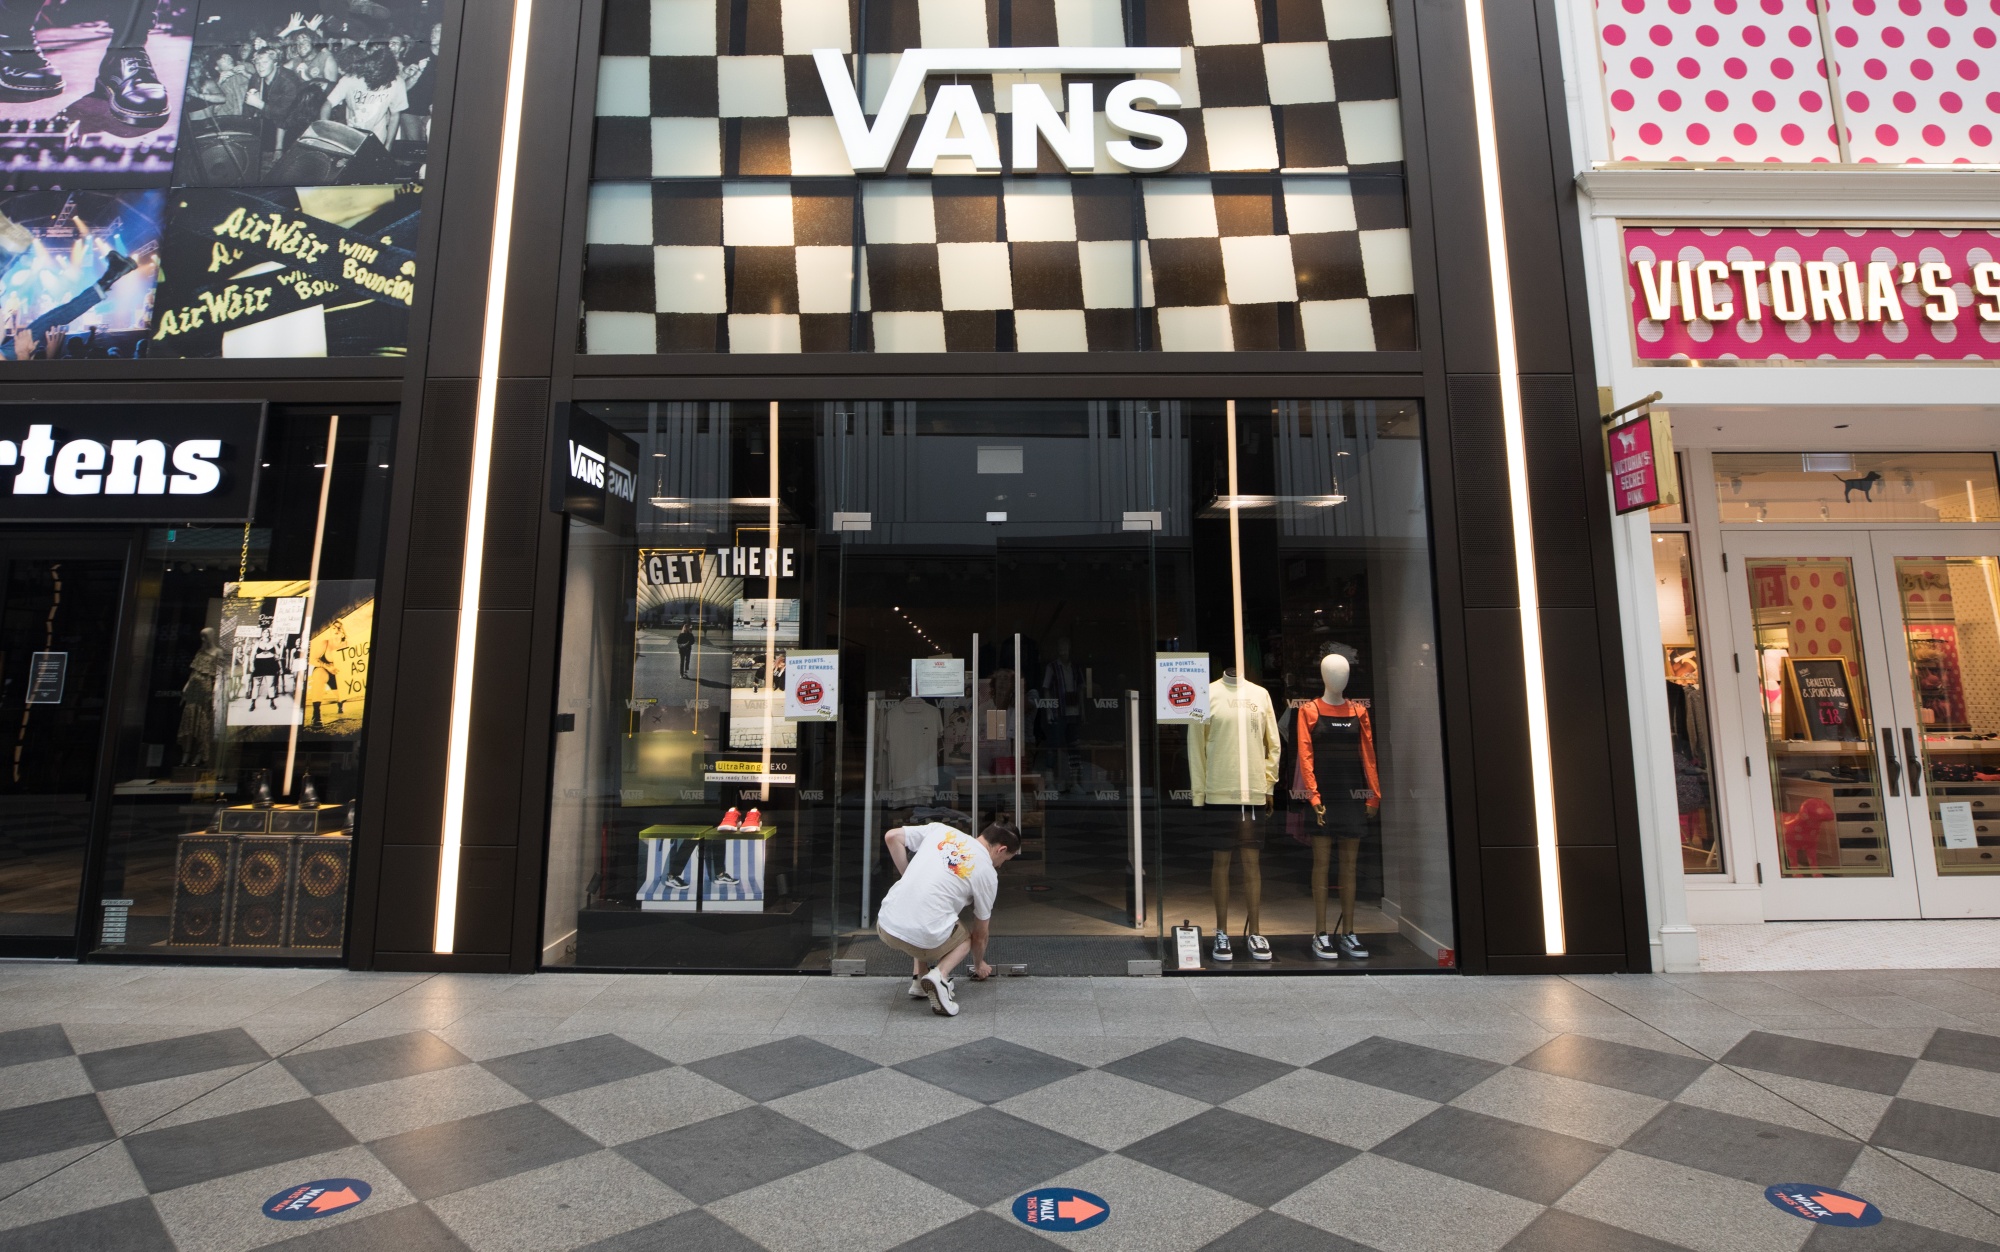 Vans sneakers maker VF Corp appoints former Nike president to board  (NYSE:VFC)